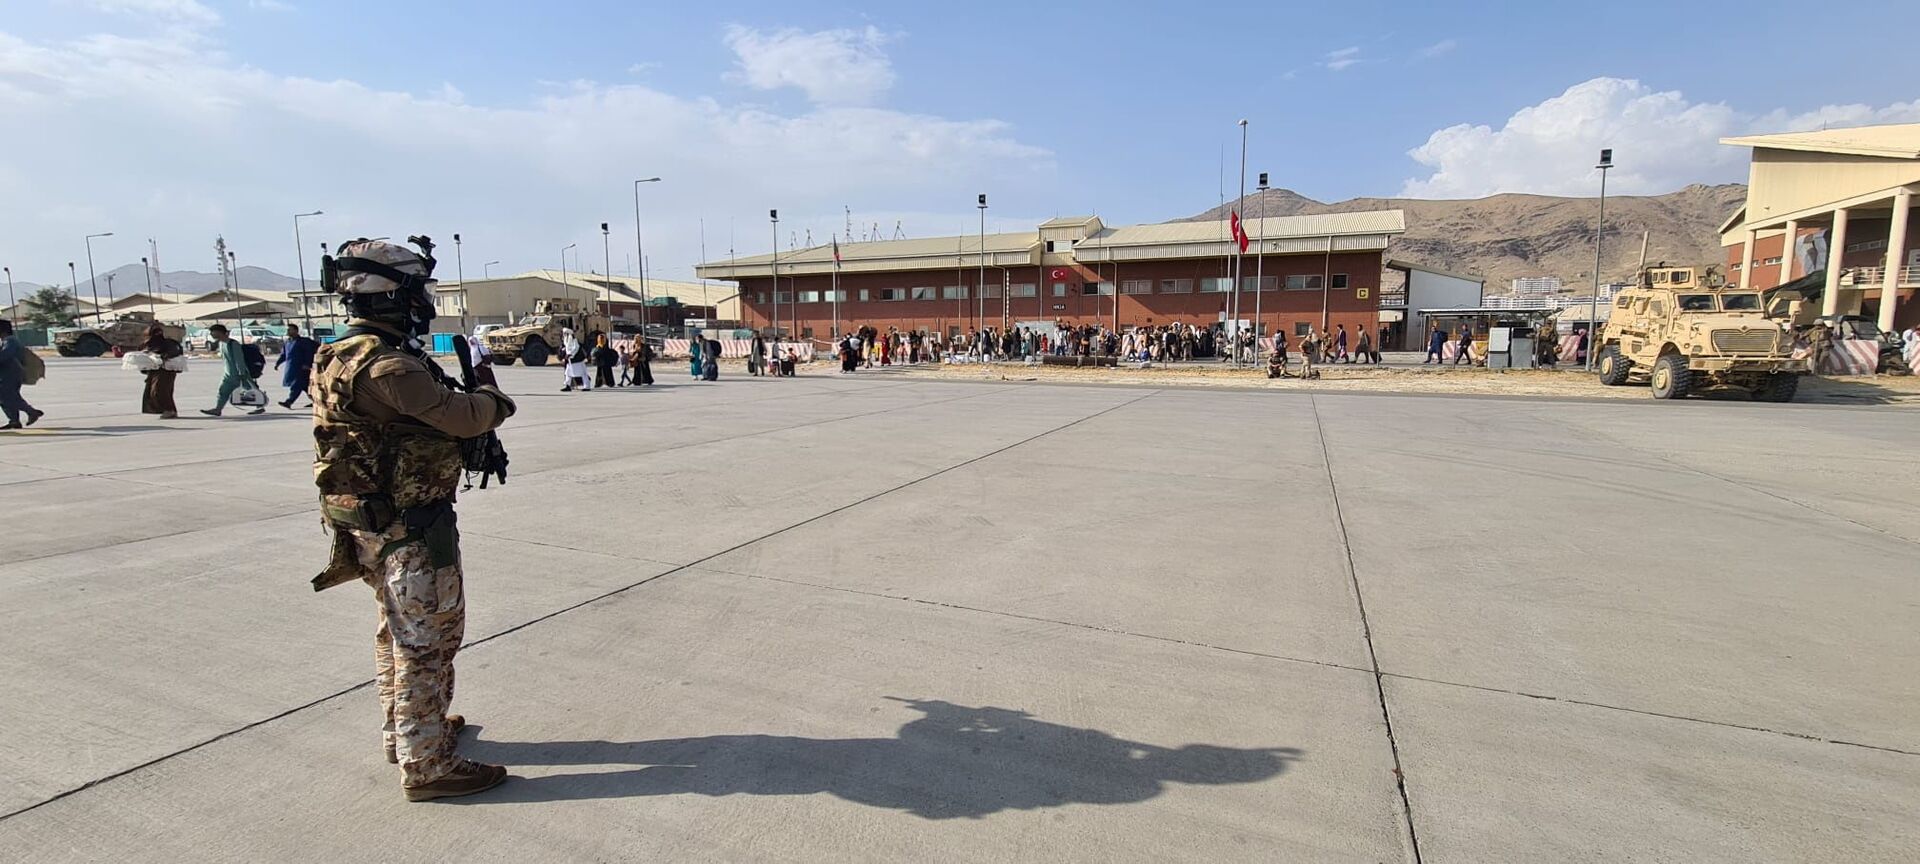 Afghan evacuees queue before boarding Italy's military aircraft C130J during evacuation at Kabul's airport, Afghanistan, August 22, 2021. Italian Ministry of Defence/Handout via REUTERS  - Sputnik International, 1920, 07.09.2021